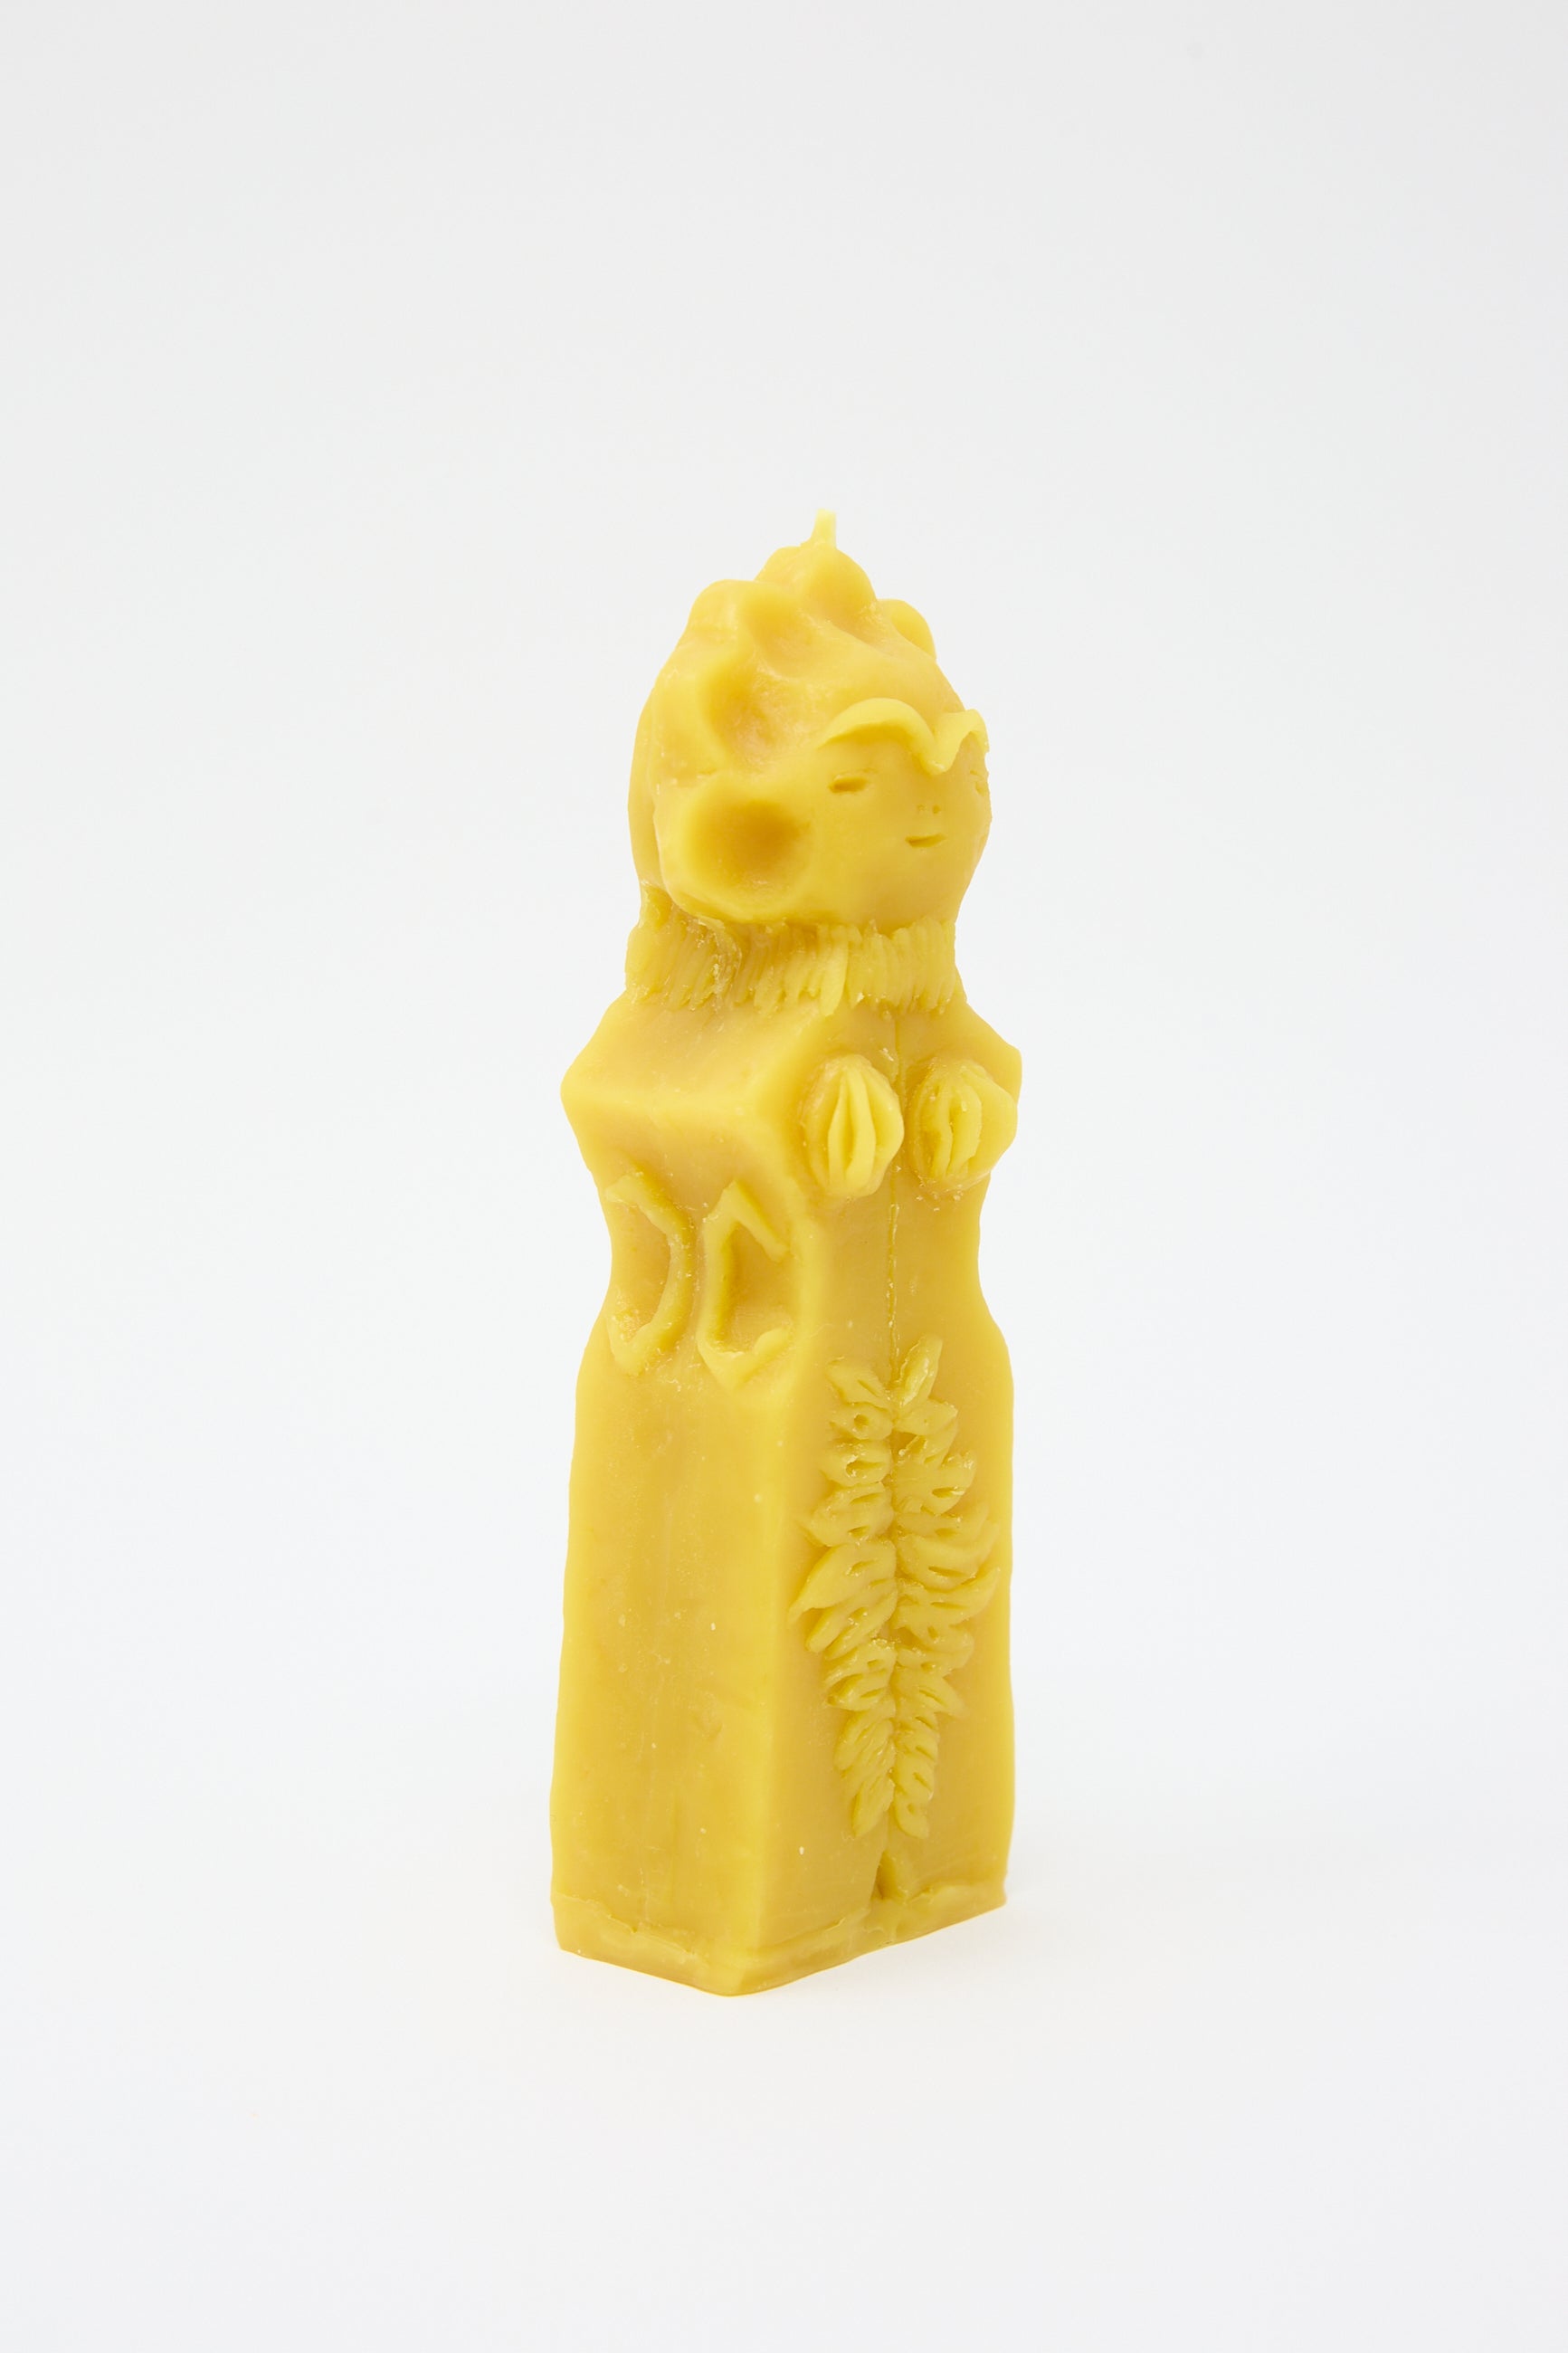 A yellow Moon Goddess Candle shaped like a cat wearing a regal robe and crown, hand formed and set against a white background by Rinn to Hitsuji.